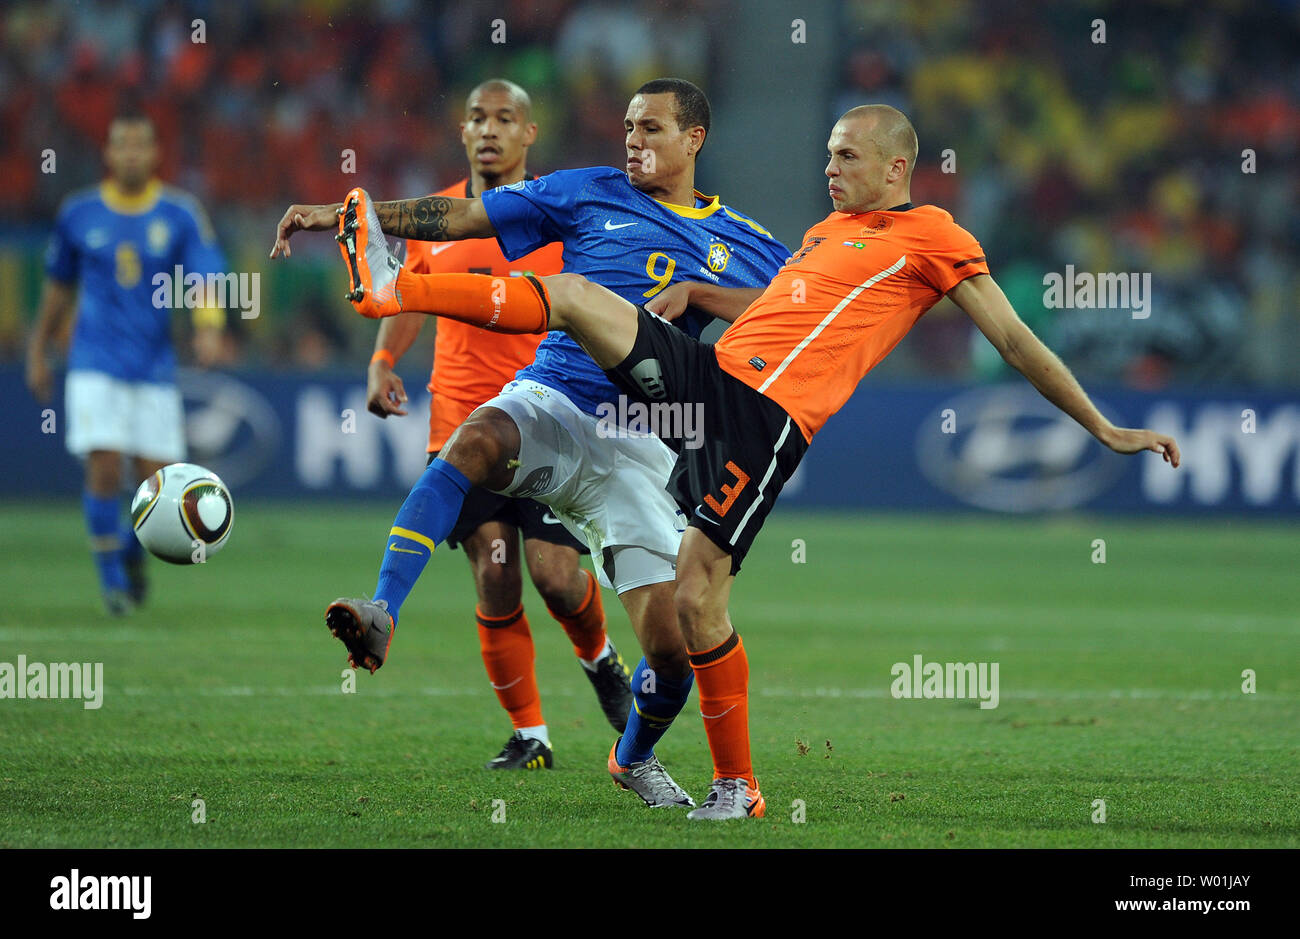 John Heitinga of The Netherlands and Luis Fabiano of Brazil kick the ball during the FIFA World Cup Quarter Final match at the Nelson Mandela Bay Stadium in Port Elizabeth, South Africa on July 2, 2010. The Netherlands beat Brazil 2-1. UPI/Chris Brunskill Stock Photo